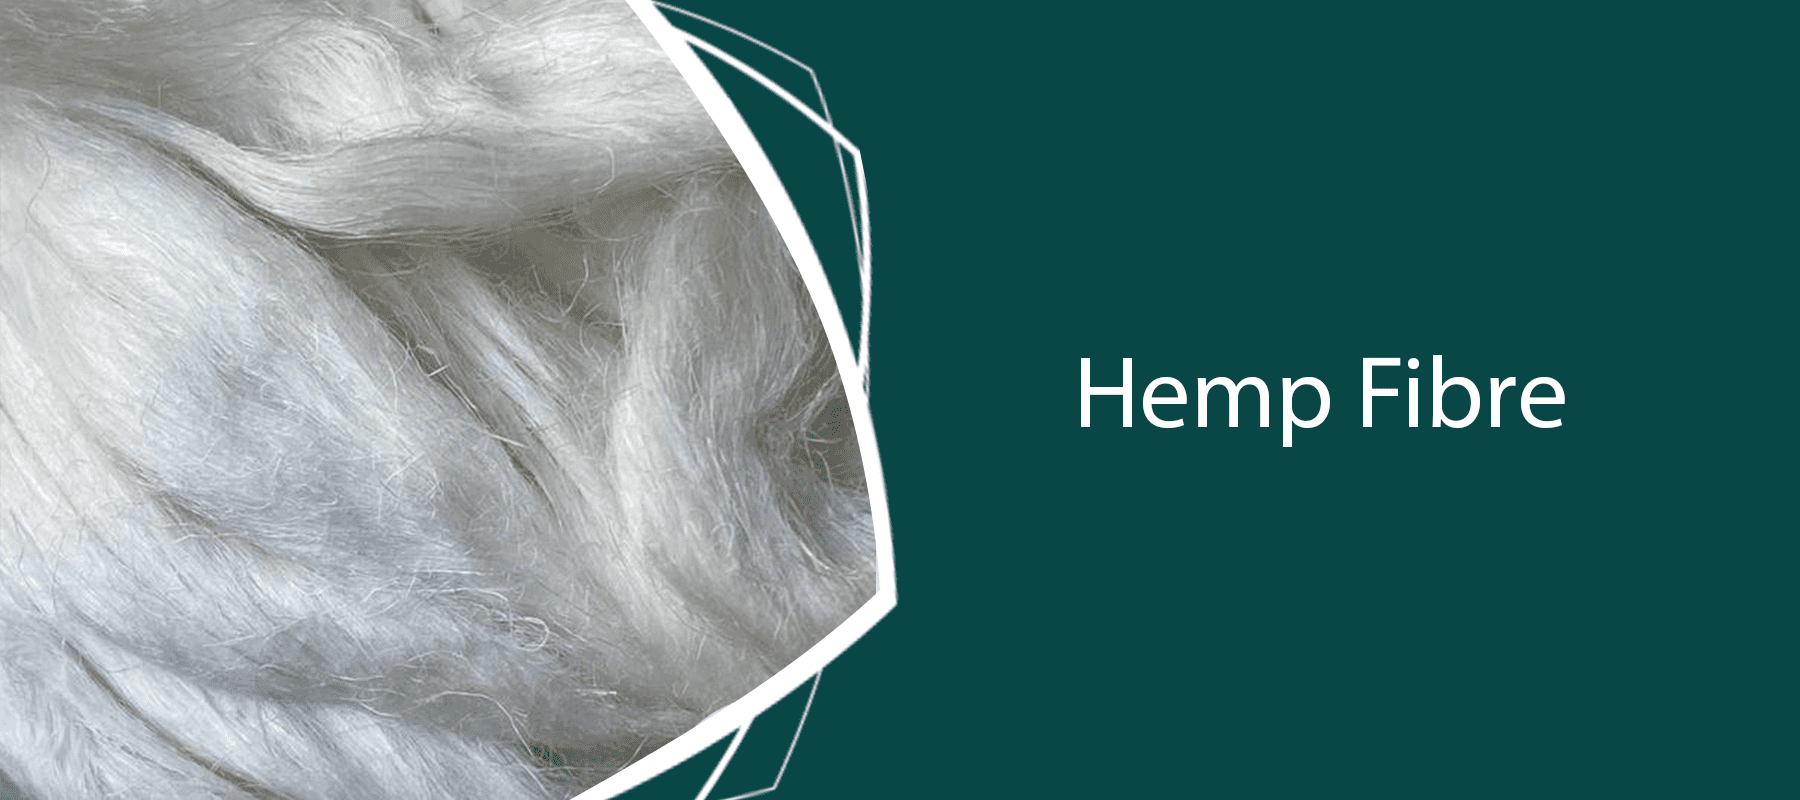 Hemp Fibre: Spinning, Paper Making, and More